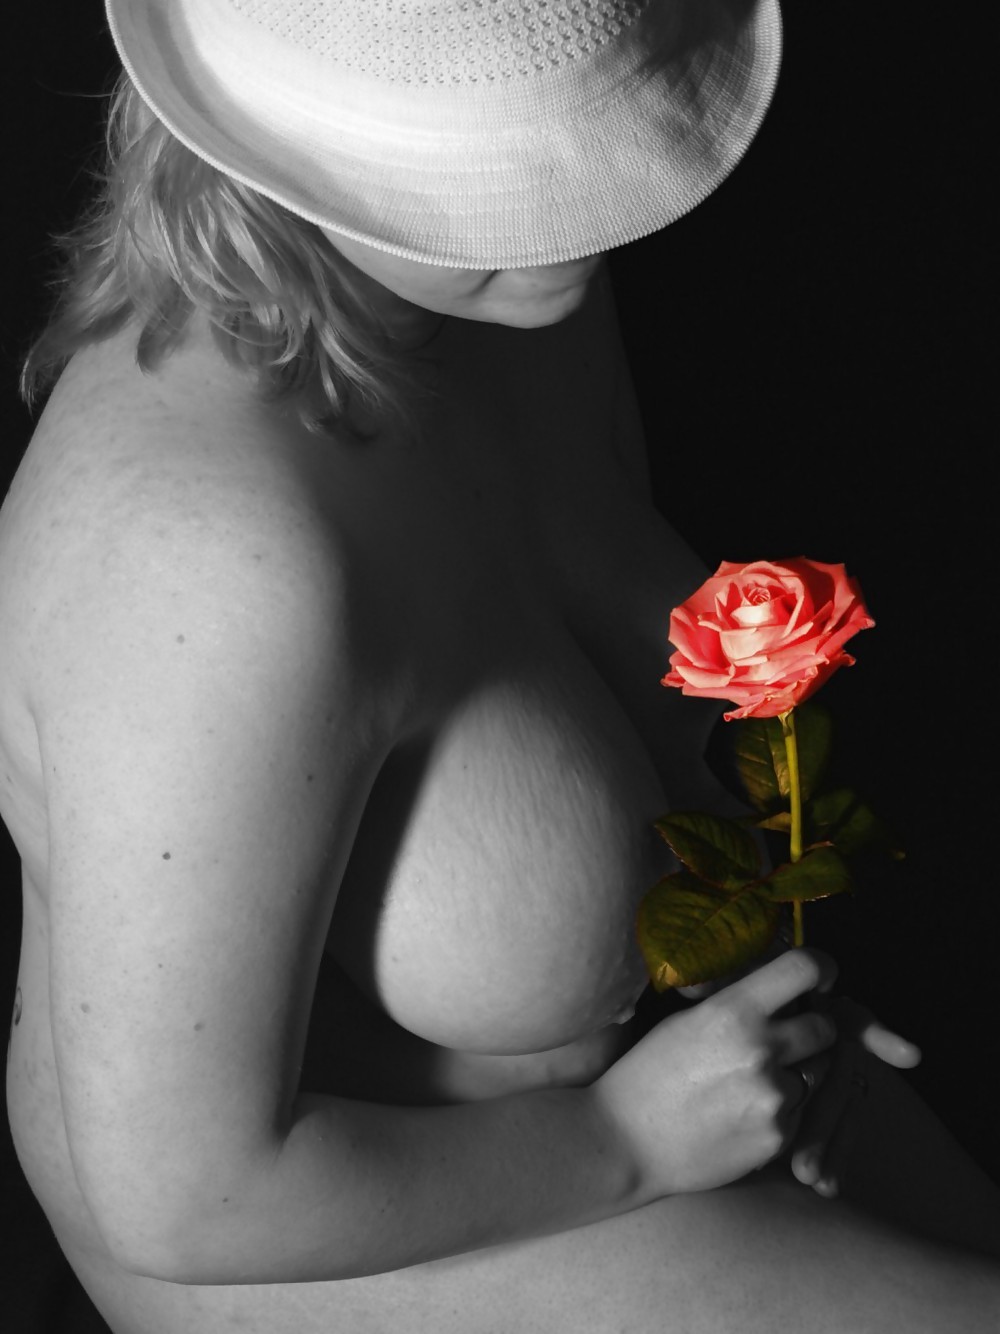 Sex Gallery Erotic Art of Roses - Session 2